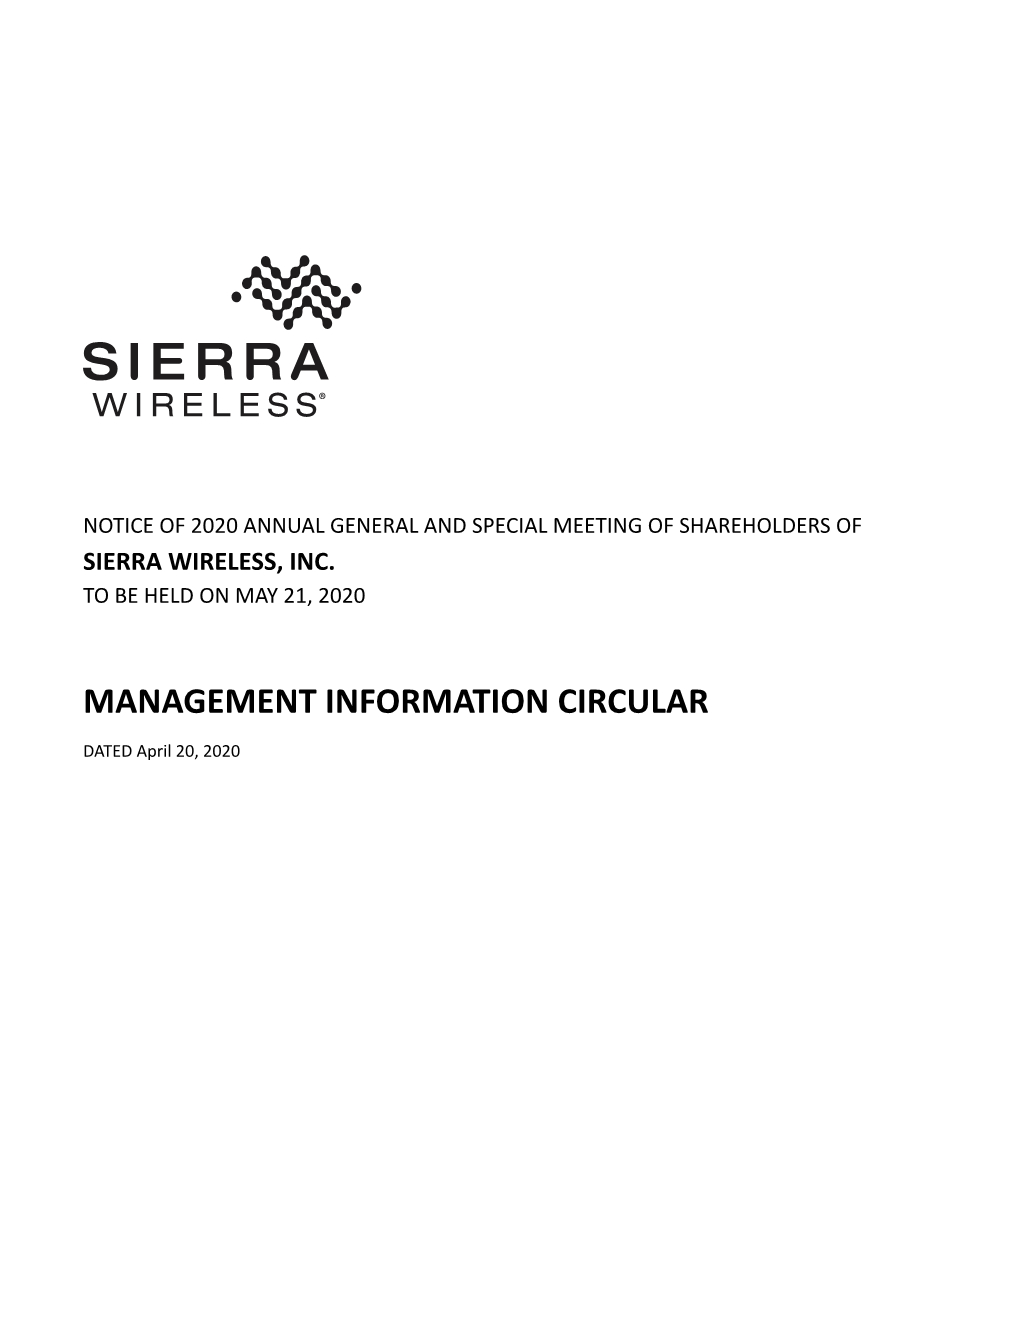 2020 Management Information Circular Be and Hereby Are Approved;